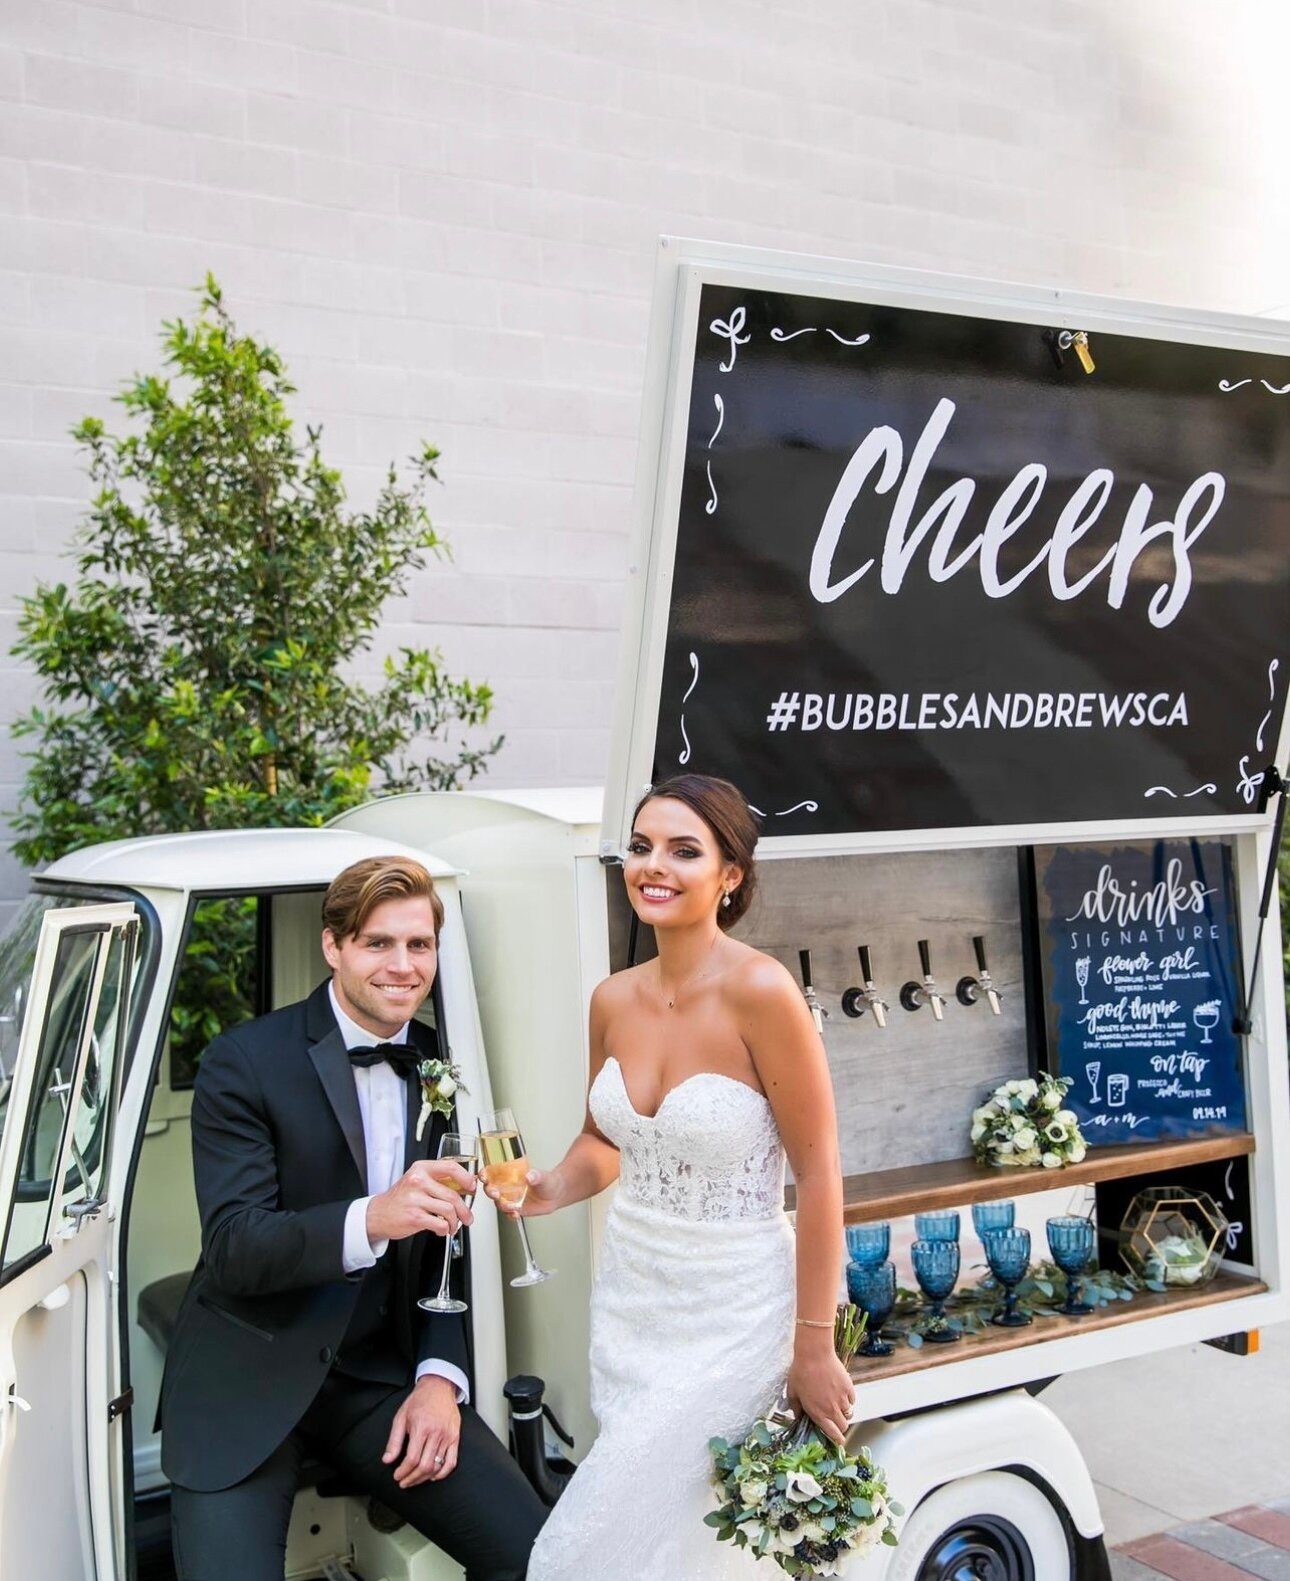 Feeling inspired AF by this beautiful color scheme, glass choice &amp; signage! 🤩 The little details really are the BIG details &lt;3⁠
⁠
🍾: @bubblesandbrewsca⁠
⁠
// #MobileBartending #CustomizedDrinks #WhatsOnTap #BubblesAndBrews #WeddingInspo #Wed